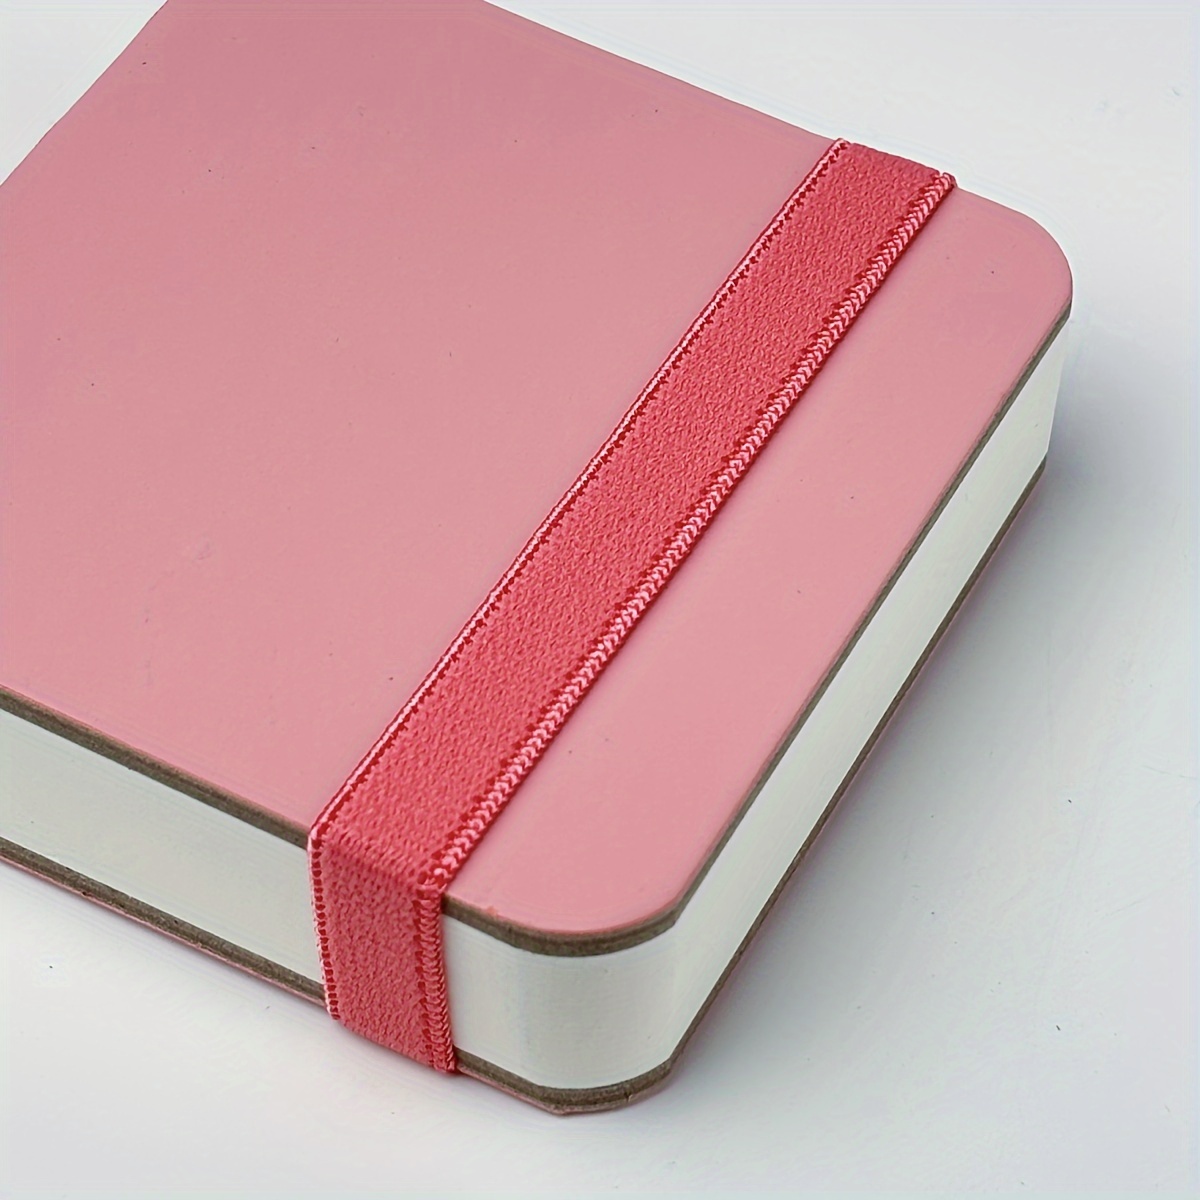 Sketchbook Pink Paper: Blank Pink Pages Journal / Notebook for Drawing,  Painting, Sketching, Writing and Doodling 100 Pages, Large 8.5 x 11.:  Paper, Colored, Journals, Notebooks: 9798617927124: : Books